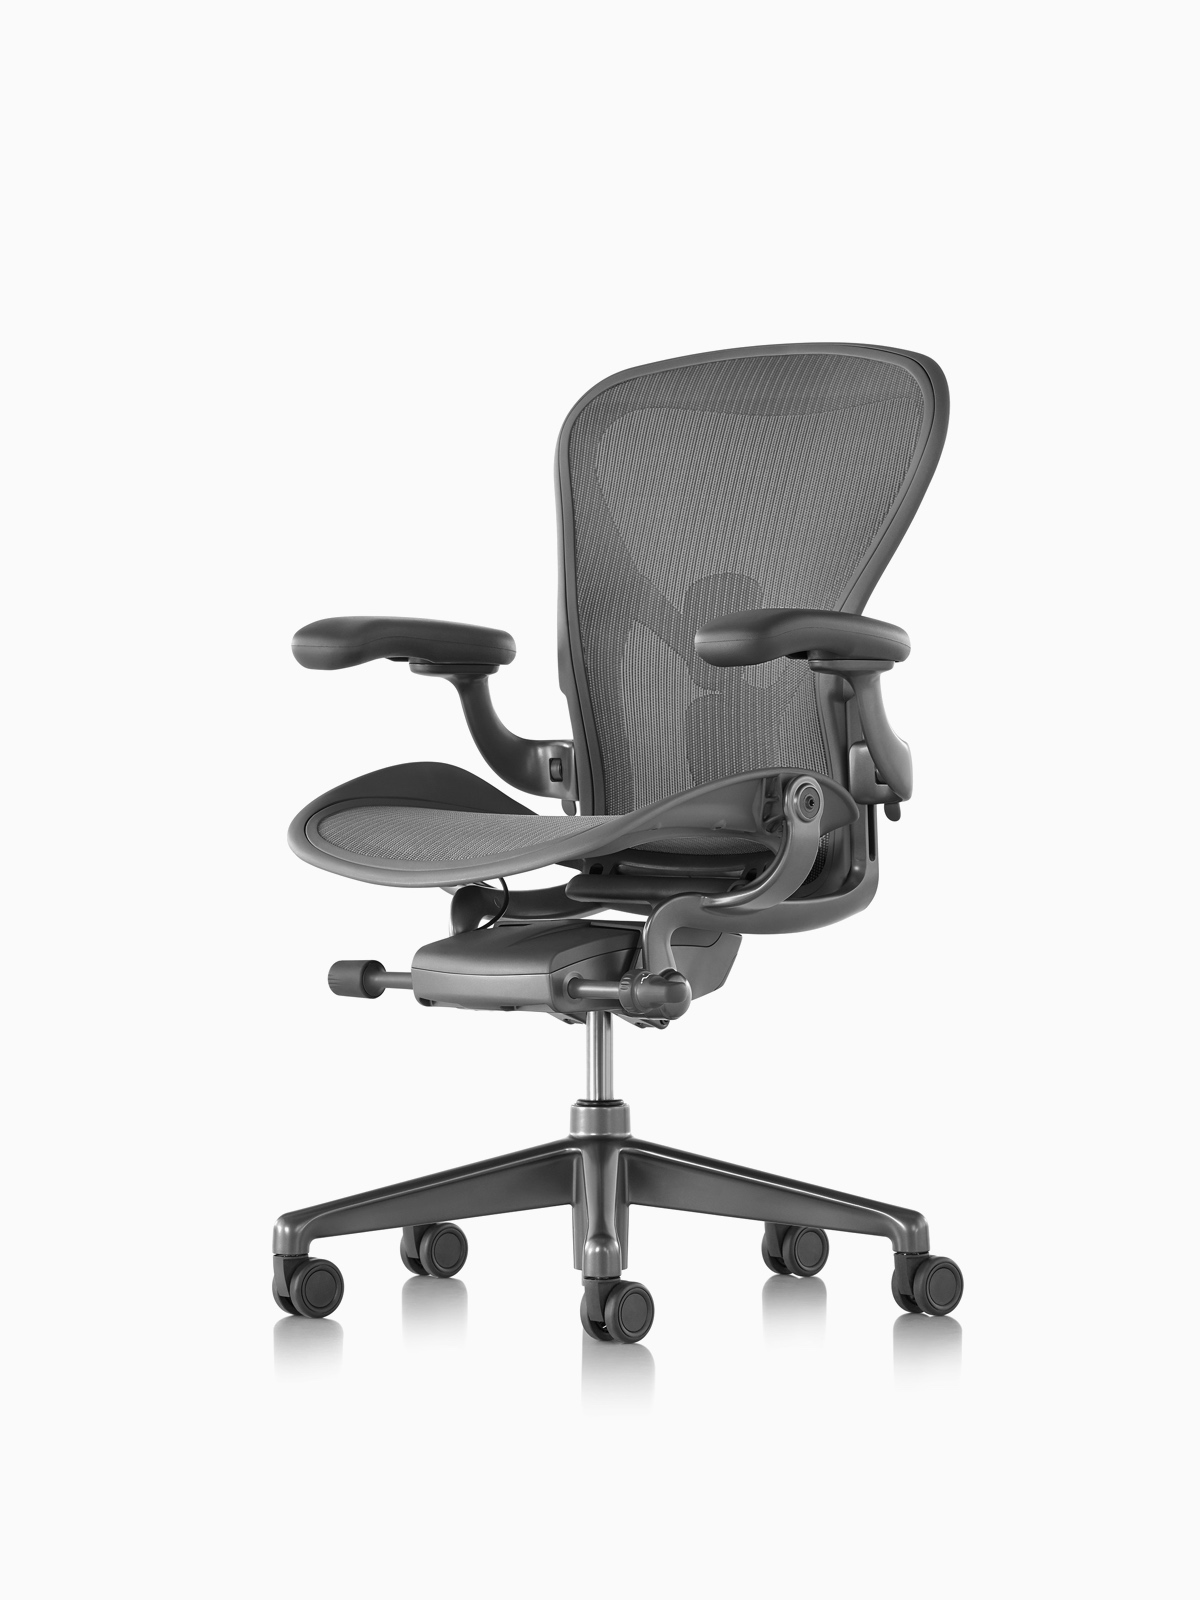 Medium Size B with Graphite / Polished Aluminum Finish and Carpet Casters Herman Miller Aeron Ergonomic Office Chair with Tilt Limiter and Seat Angle Adjustable PostureFit SL Arms 